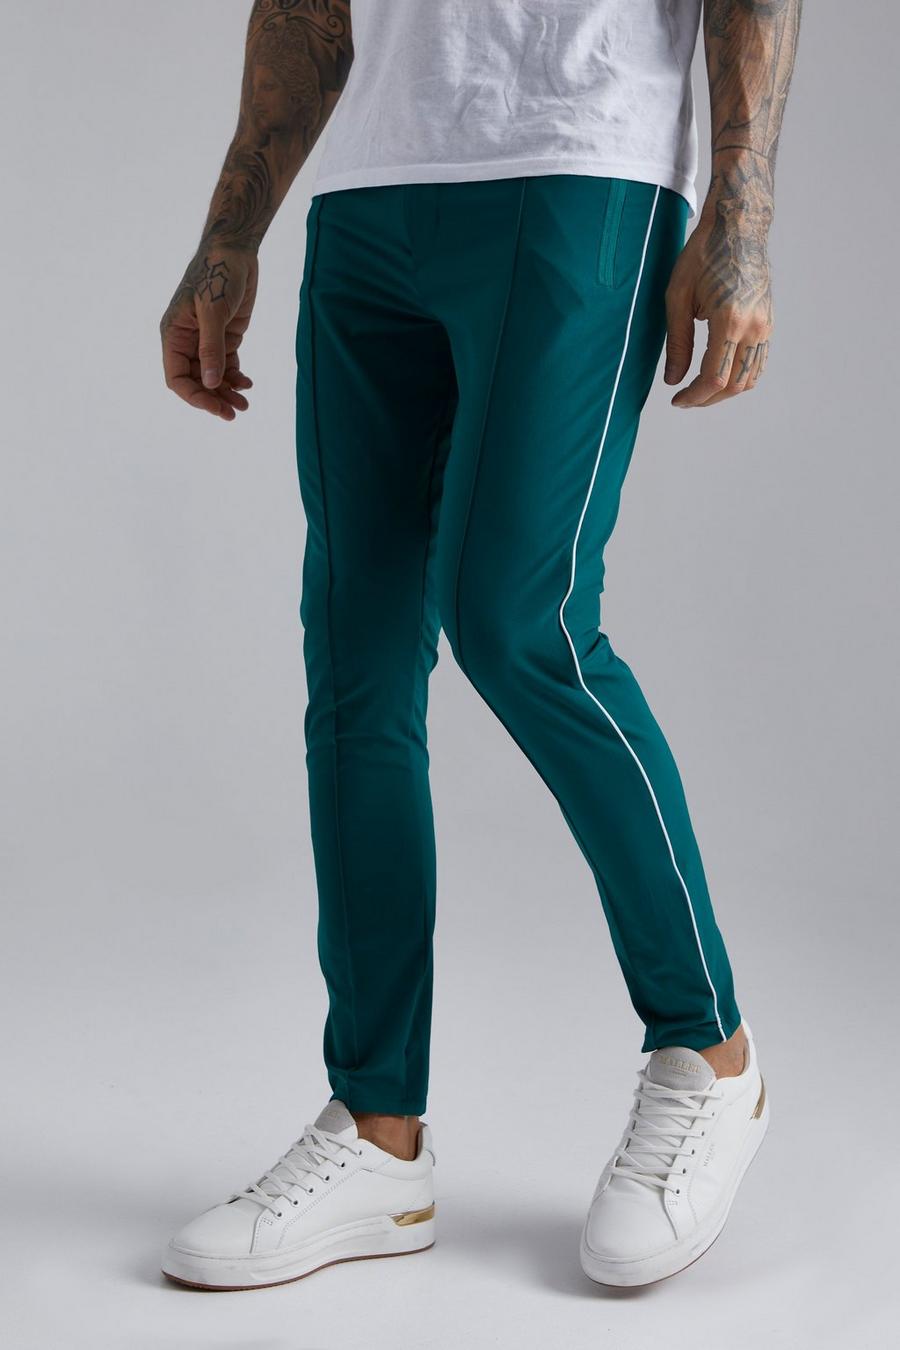 Forest gerde Fixed Waist Skinny Piping Trouser